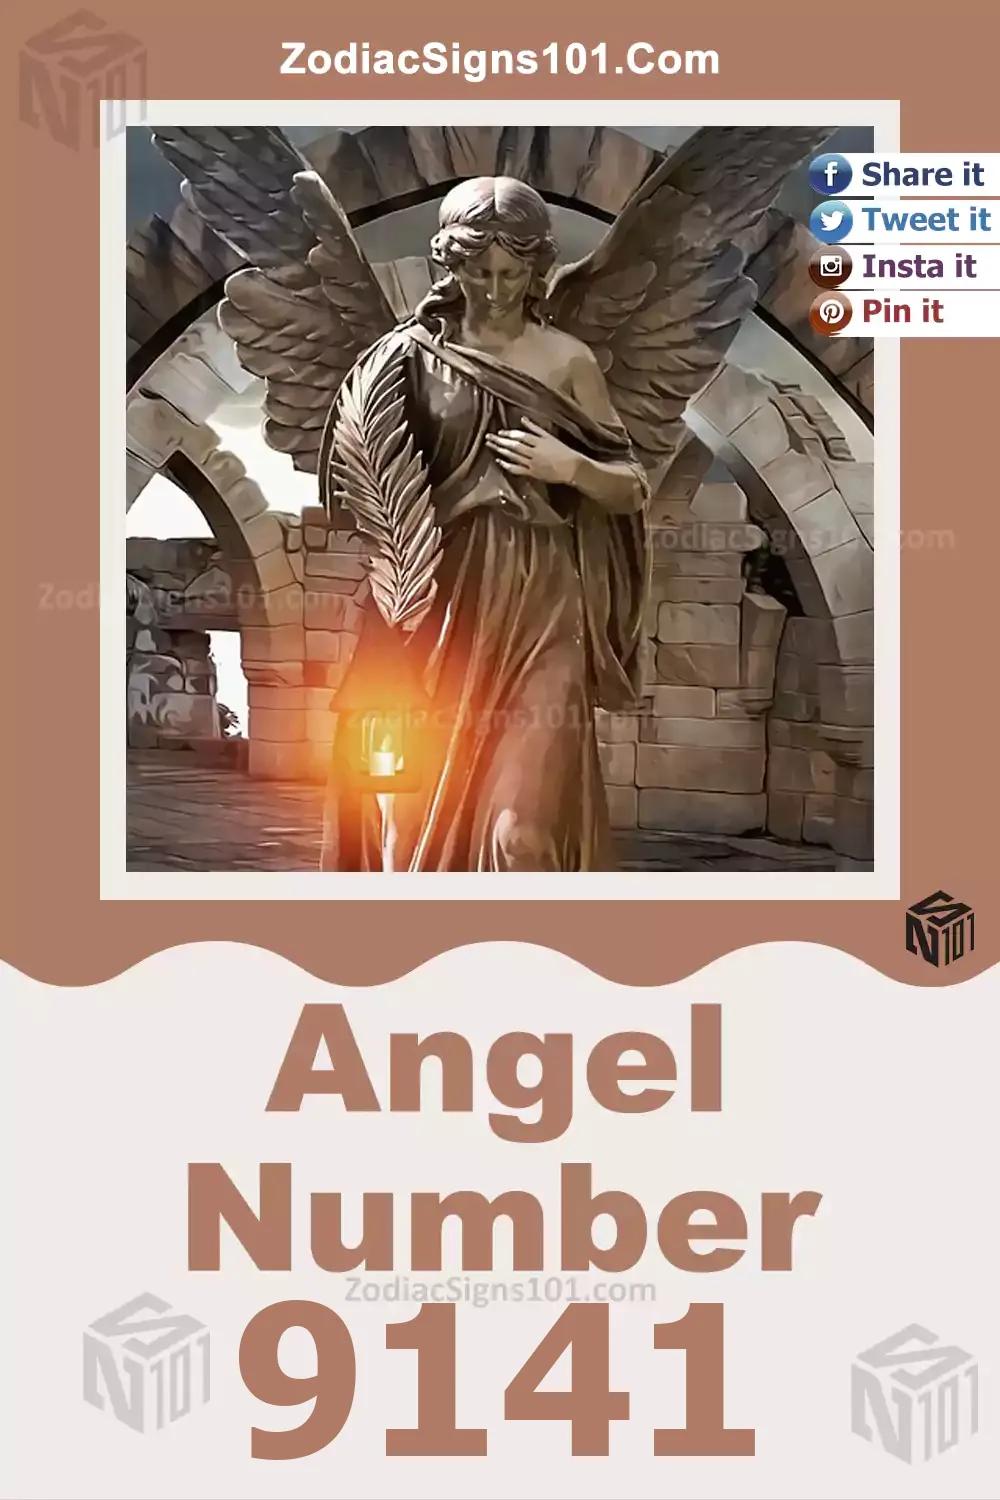 9141 Angel Number Meaning